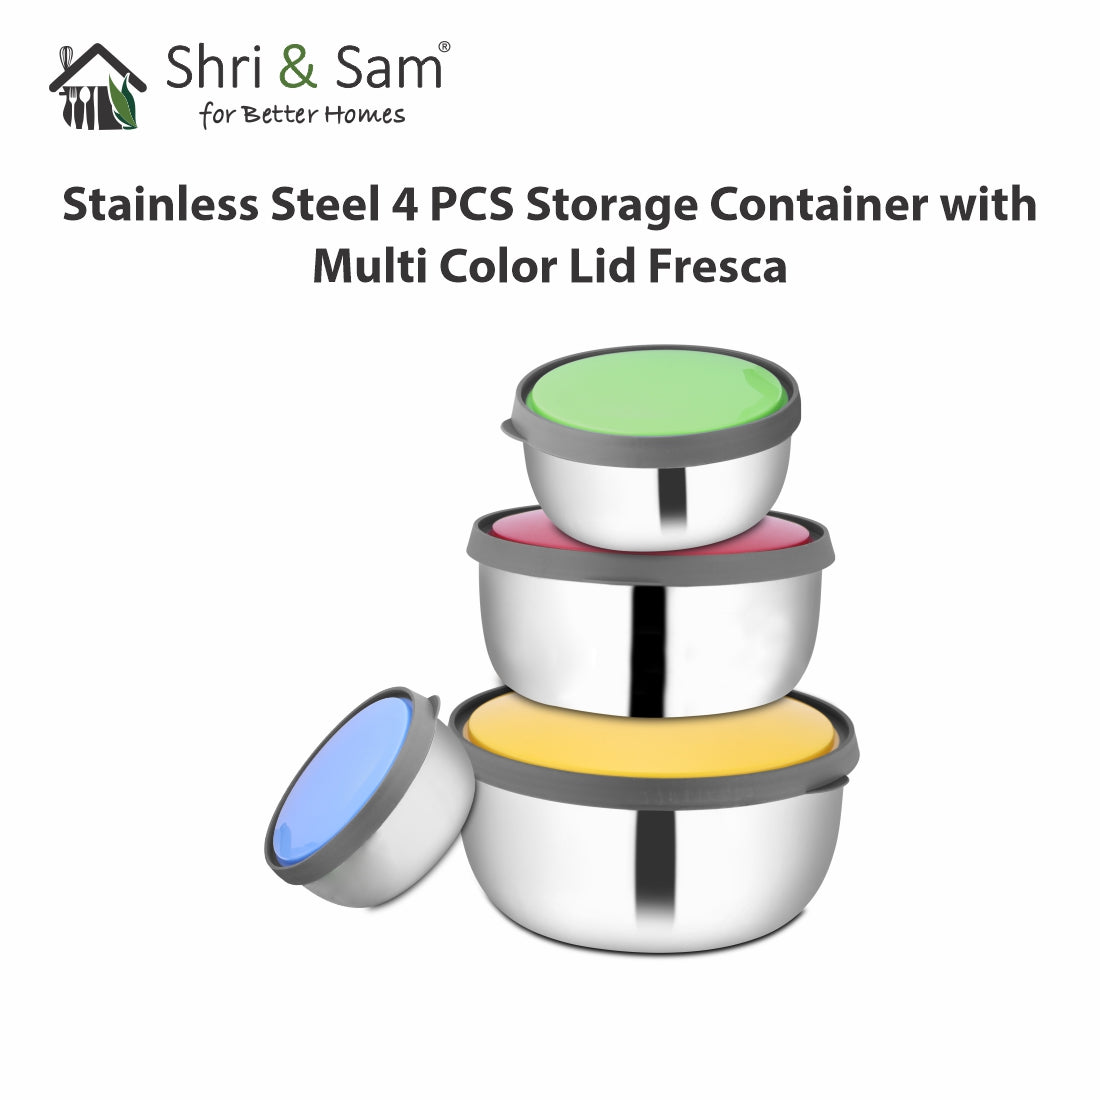 Stainless Steel 4 PCS Storage Container with Multi Color Lid Fresca